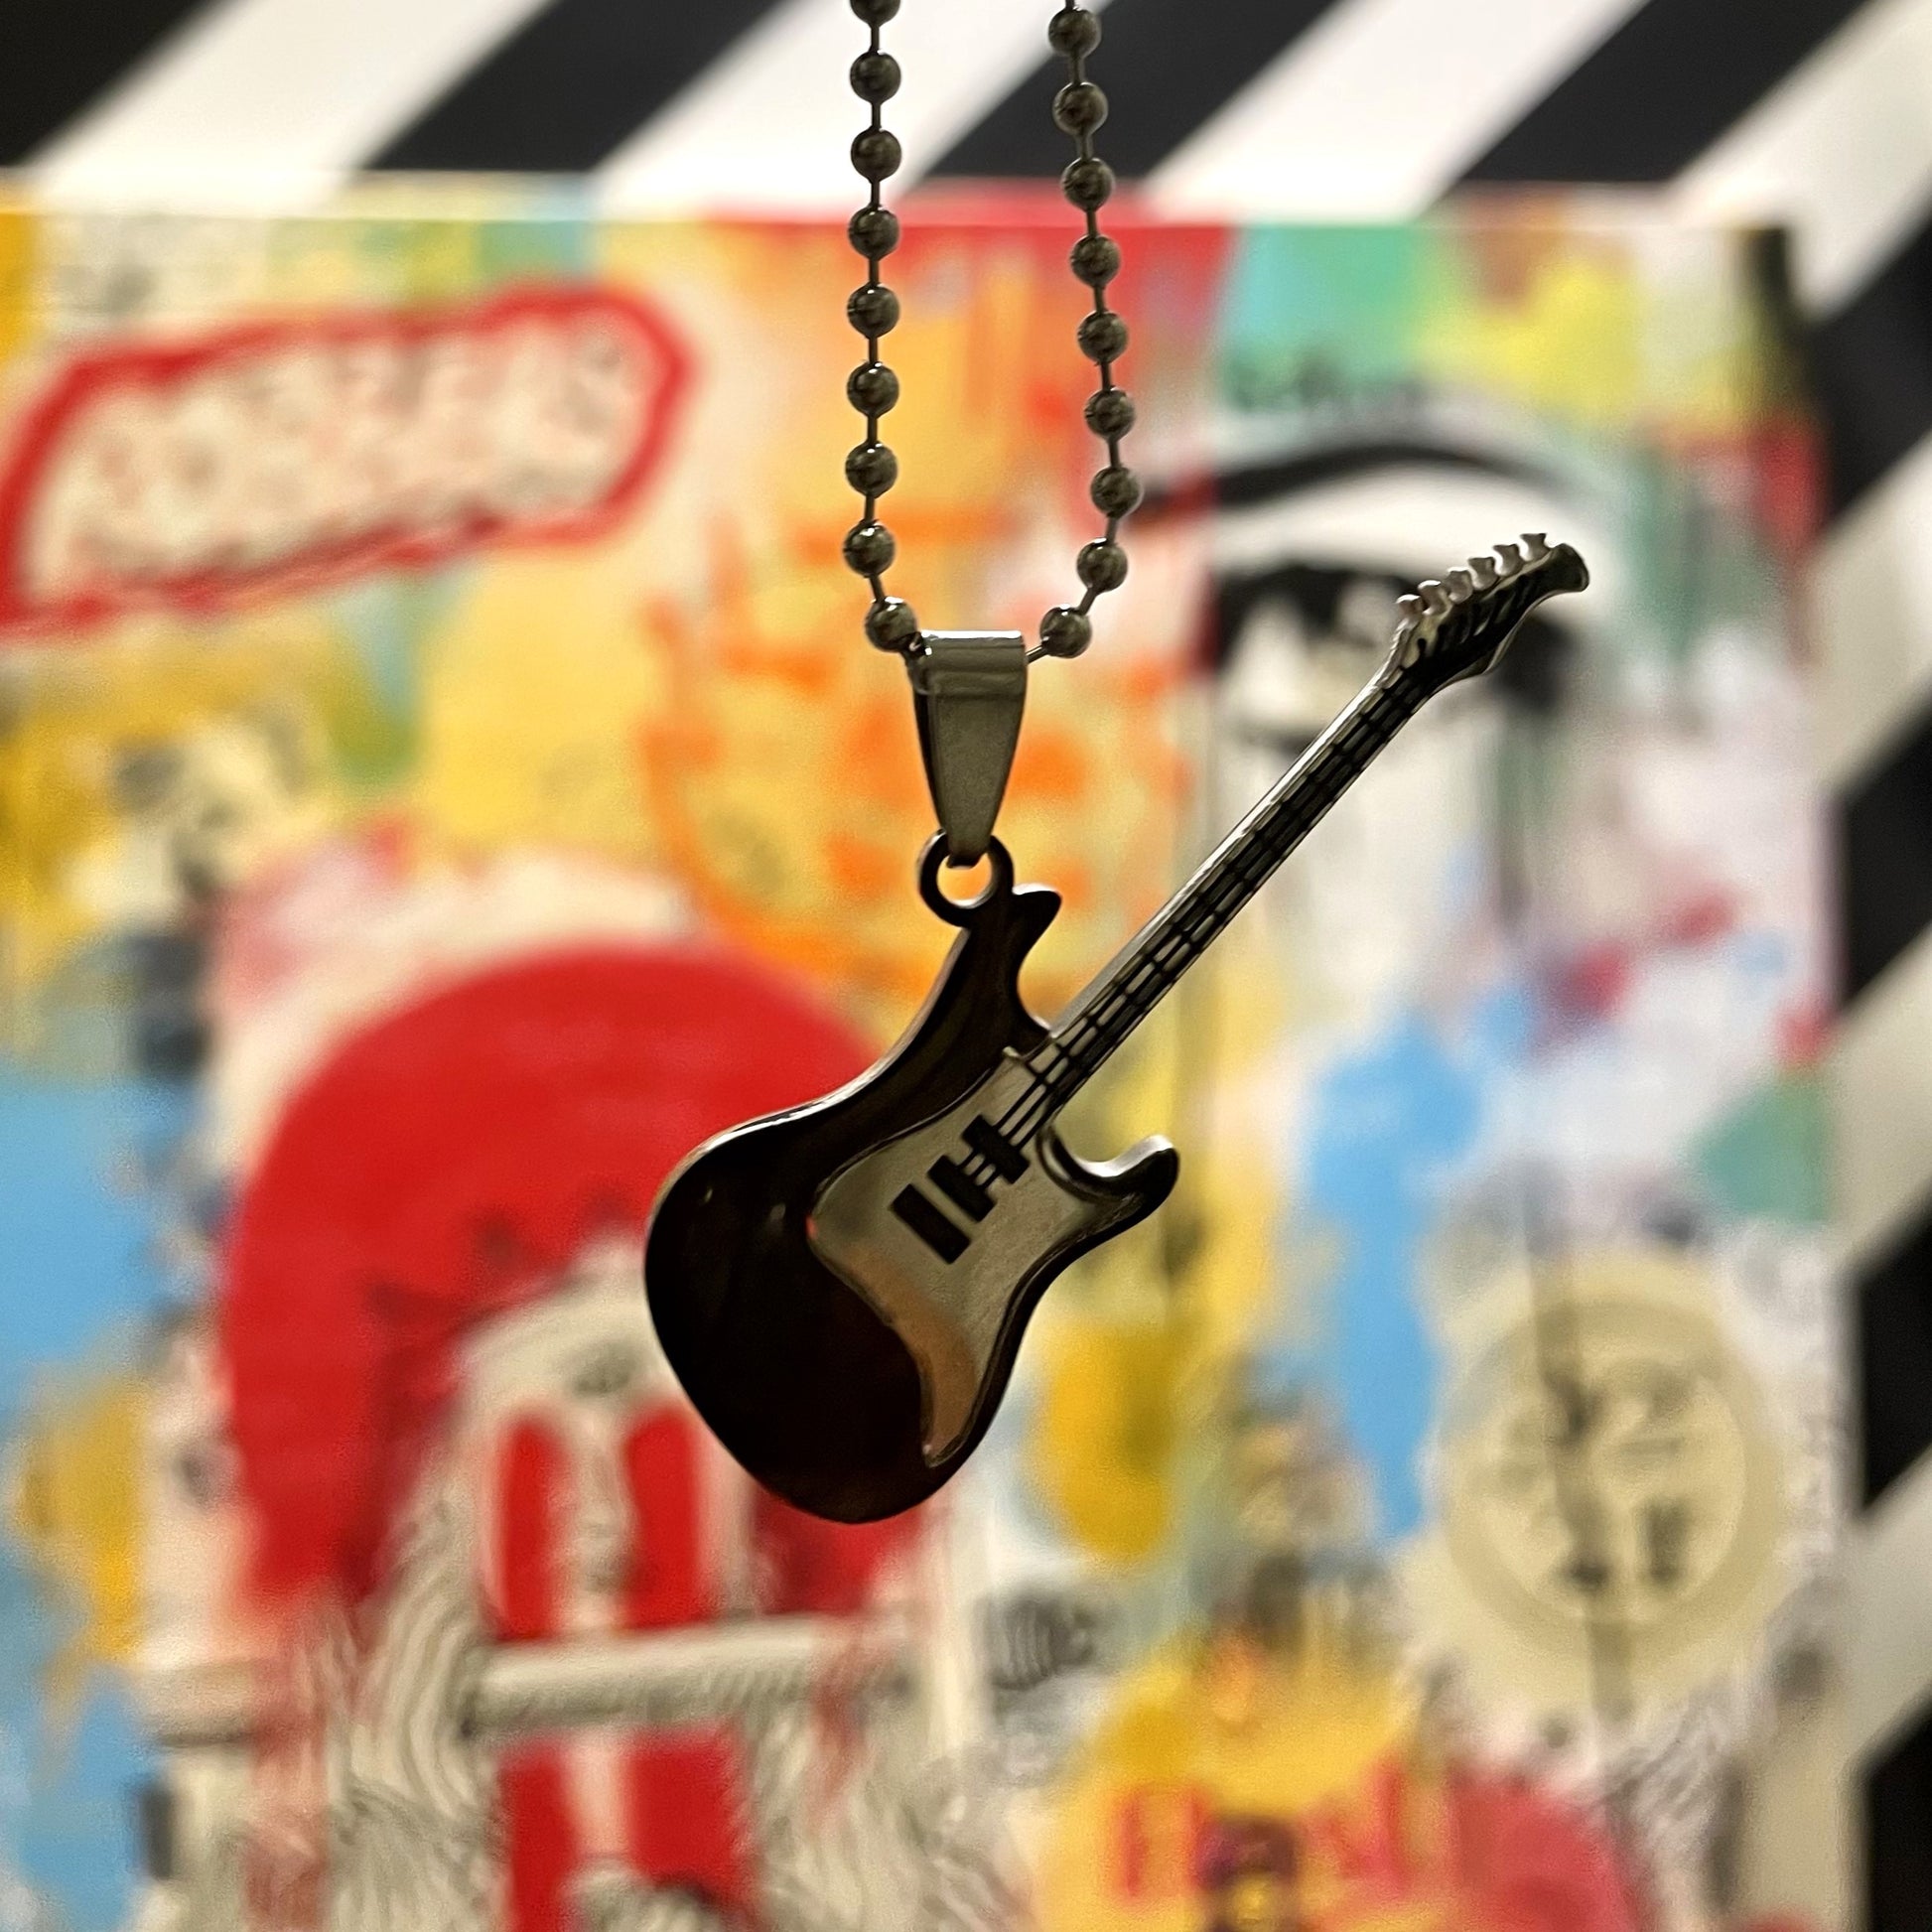 Guitar jewelry for musicians